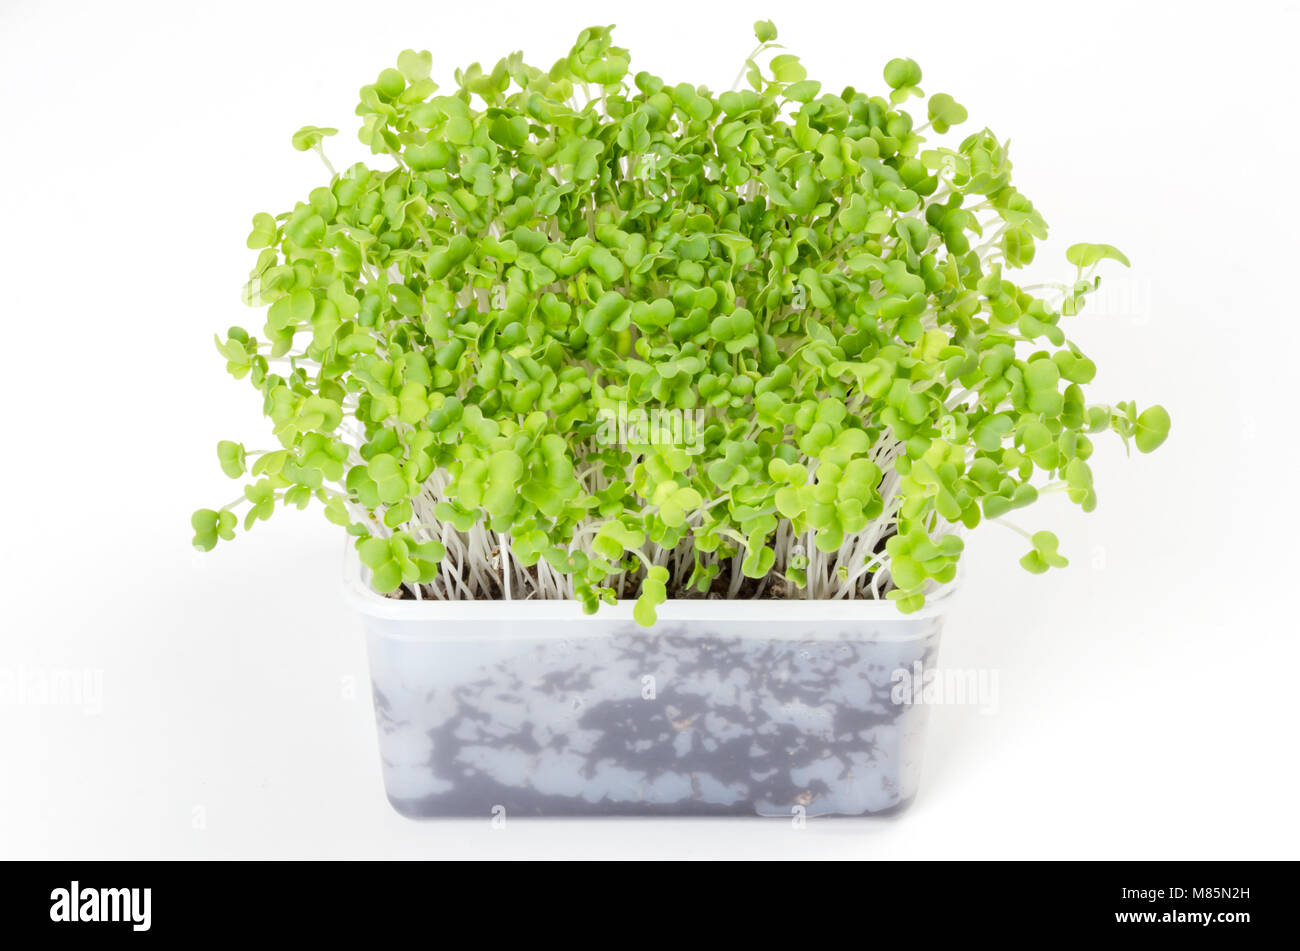 Mizuna microgreen in white plastic container. Green shoots of Japanese mustard greens, kyona or spider mustard. Brassica juncea. Sprouts. Vegetable. Stock Photo